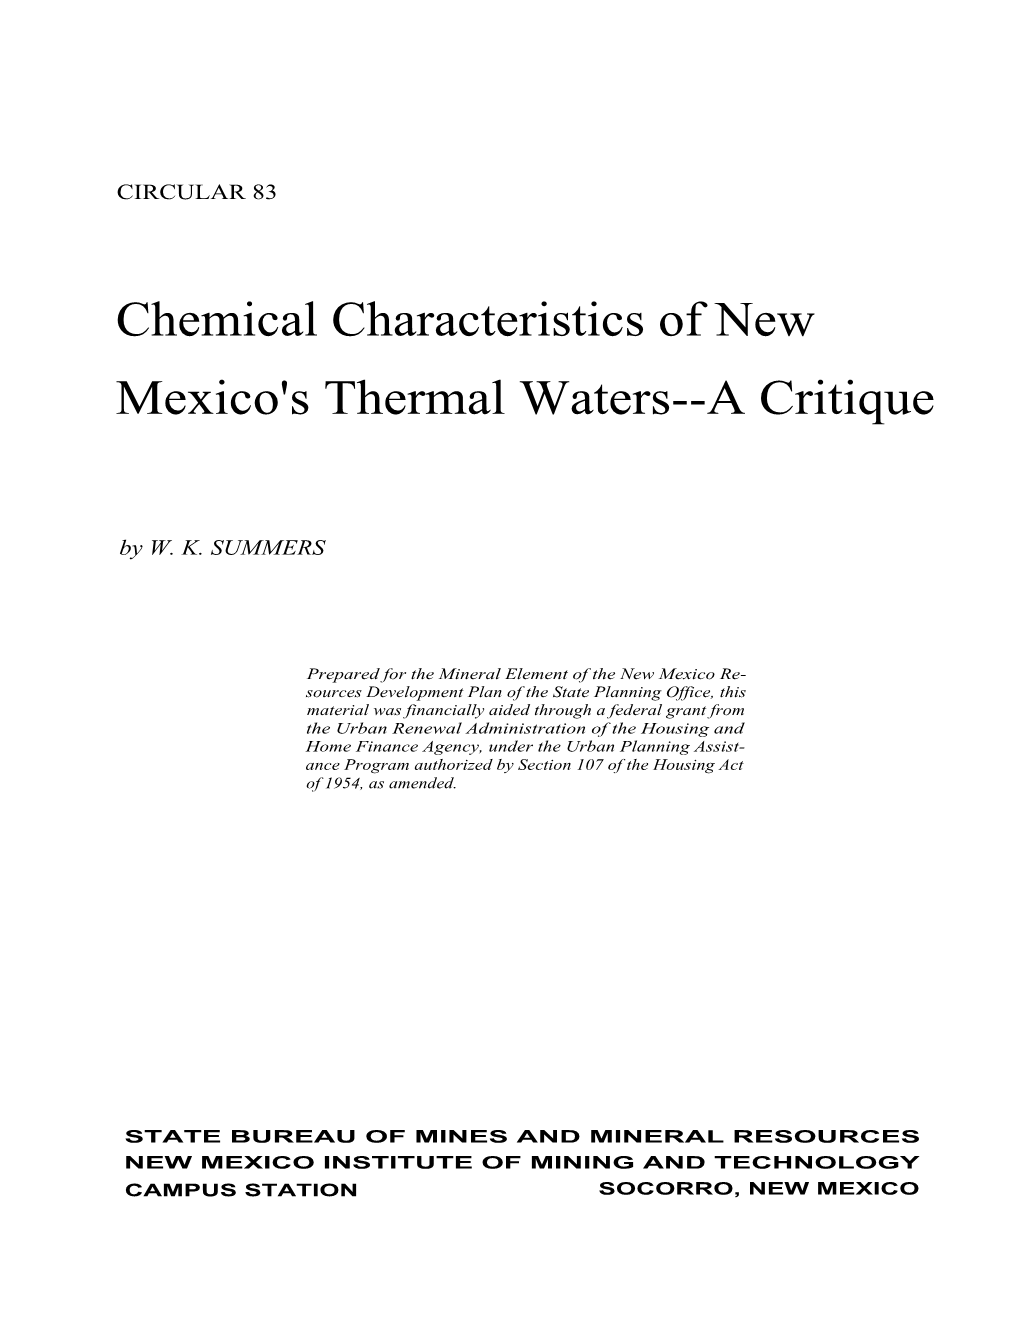 Chemical Characteristics of New Mexico's Thermal Waters--A Critique